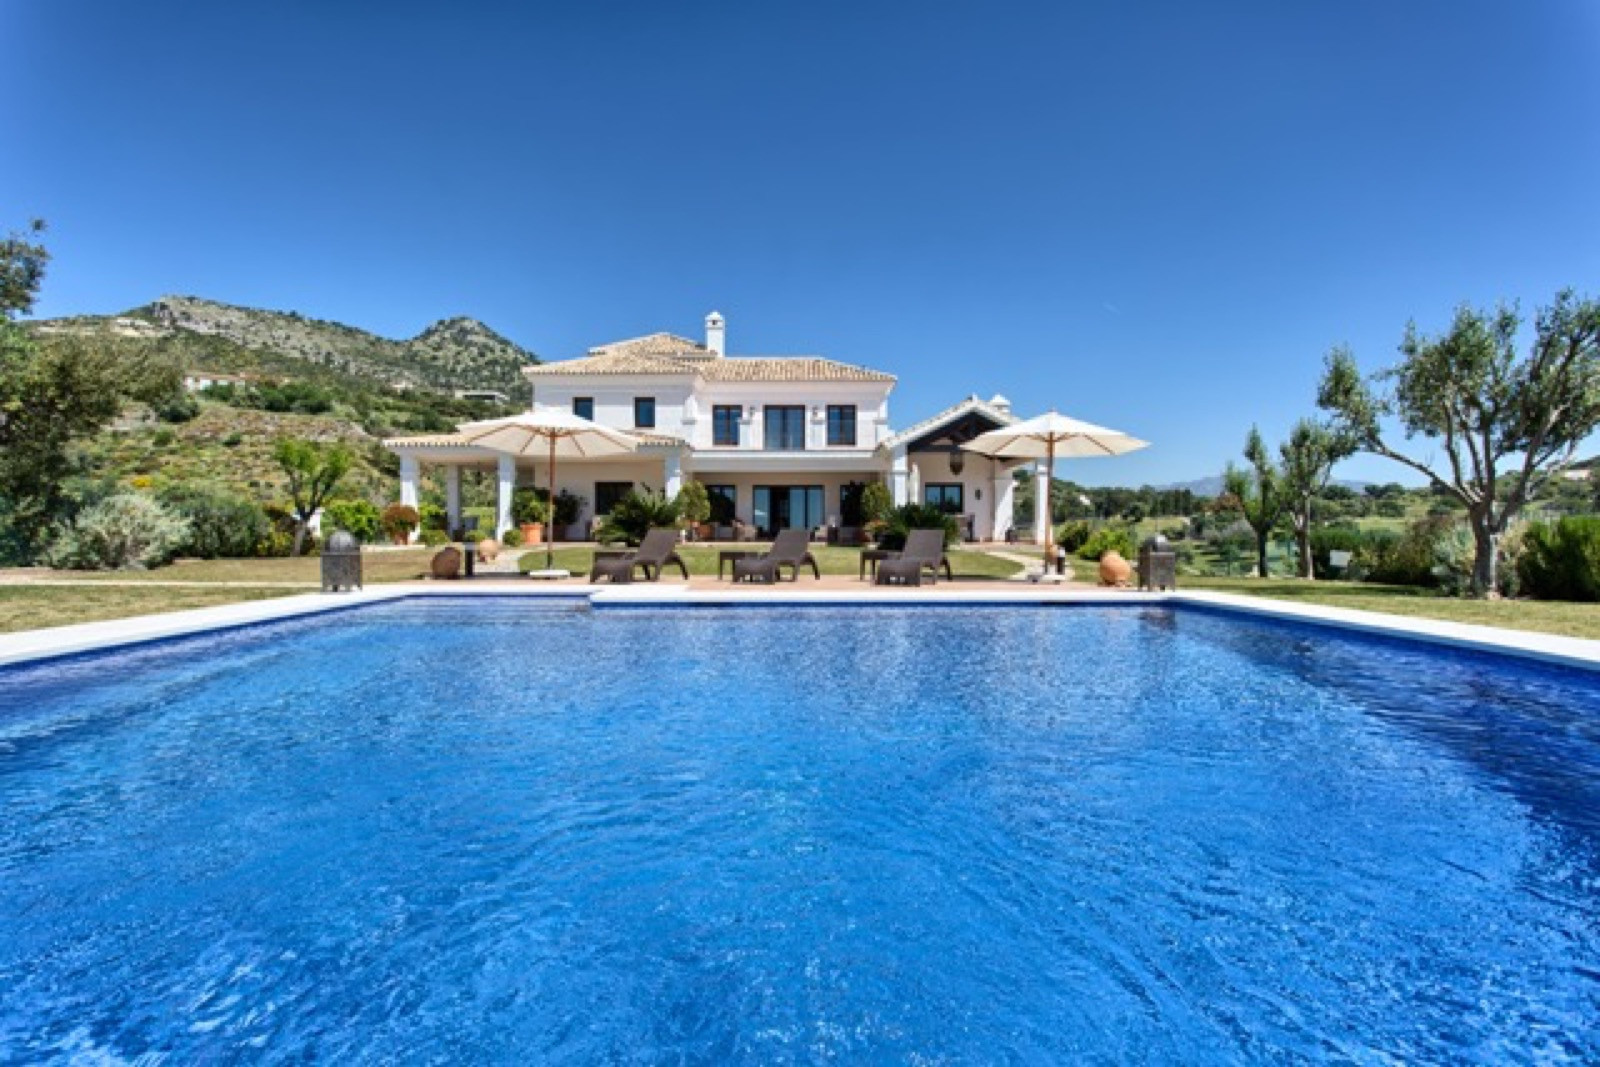 Frontline golf villa, facing South, with panoramic views to the mountains and sea in Marbella Club Golf Resort